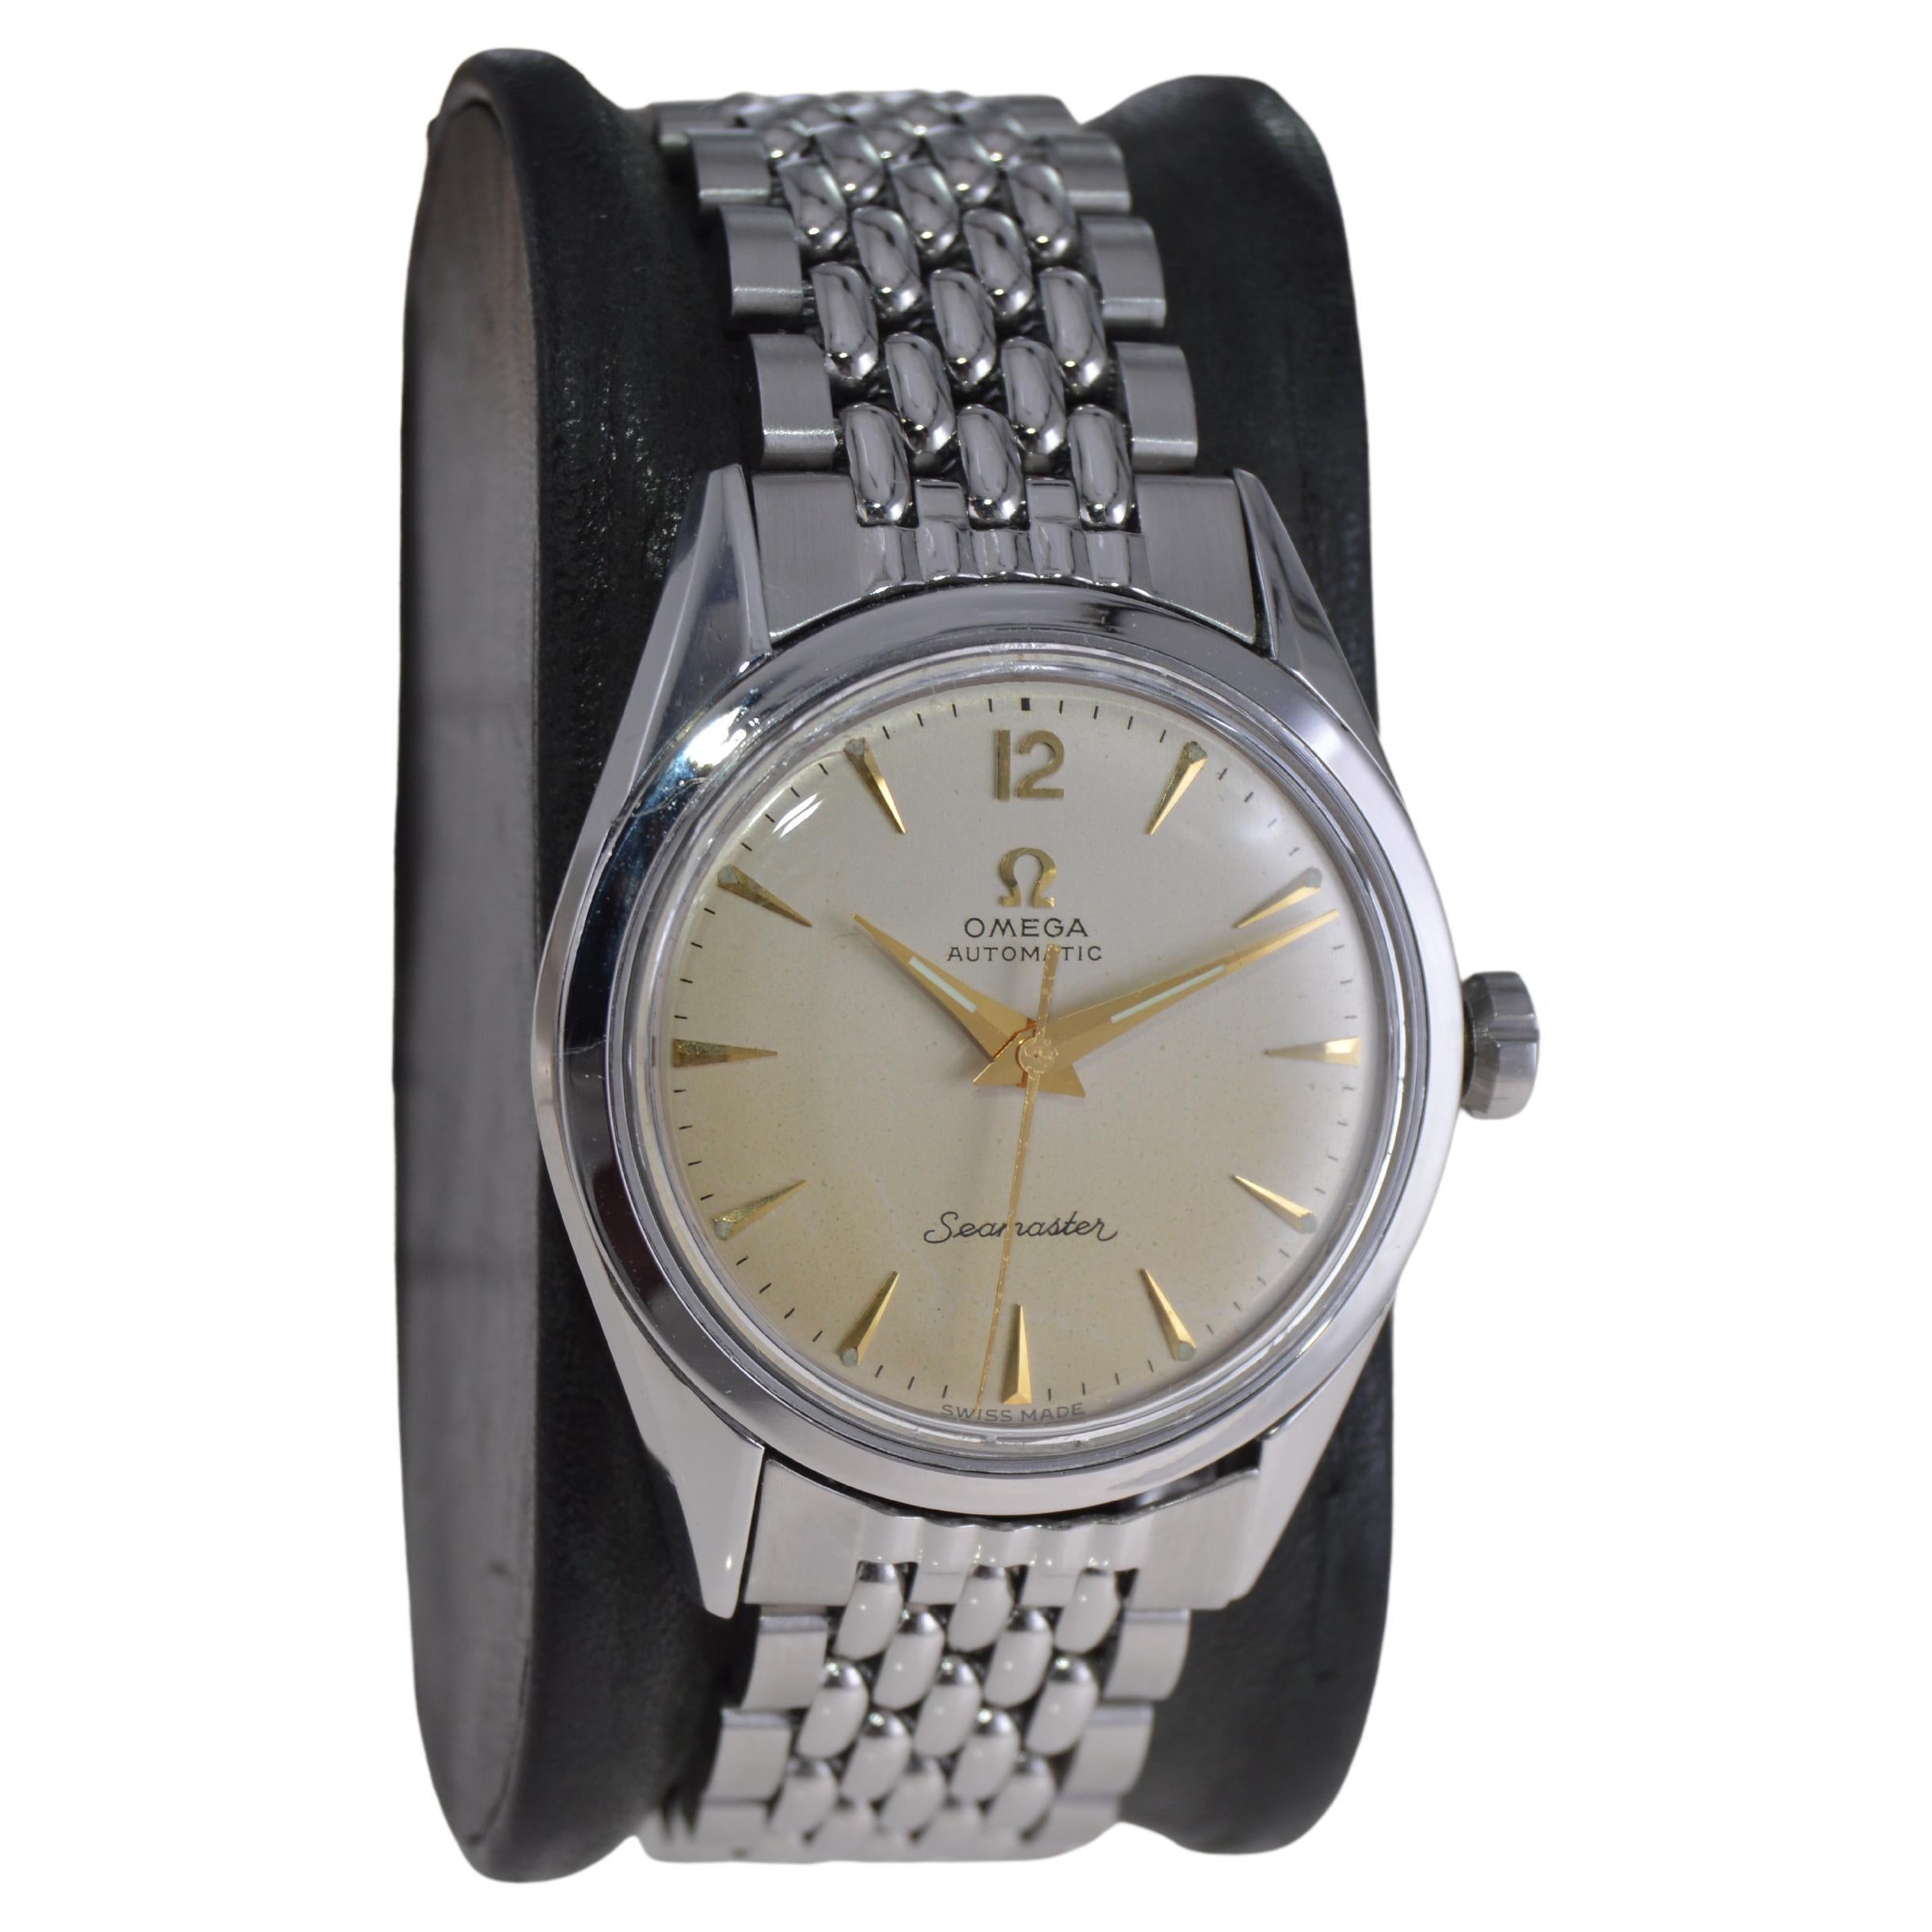 FACTORY / HOUSE: Omega Watch Company
STYLE / REFERENCE: Seamaster
METAL / MATERIAL: Stainless Steel
CIRCA / YEAR: 1950'ss
DIMENSIONS / SIZE: 41mm Length X 33mm Diameter
MOVEMENT / CALIBER: Automatic Winding / 17 Jewels / Caliber 
DIAL / HANDS: